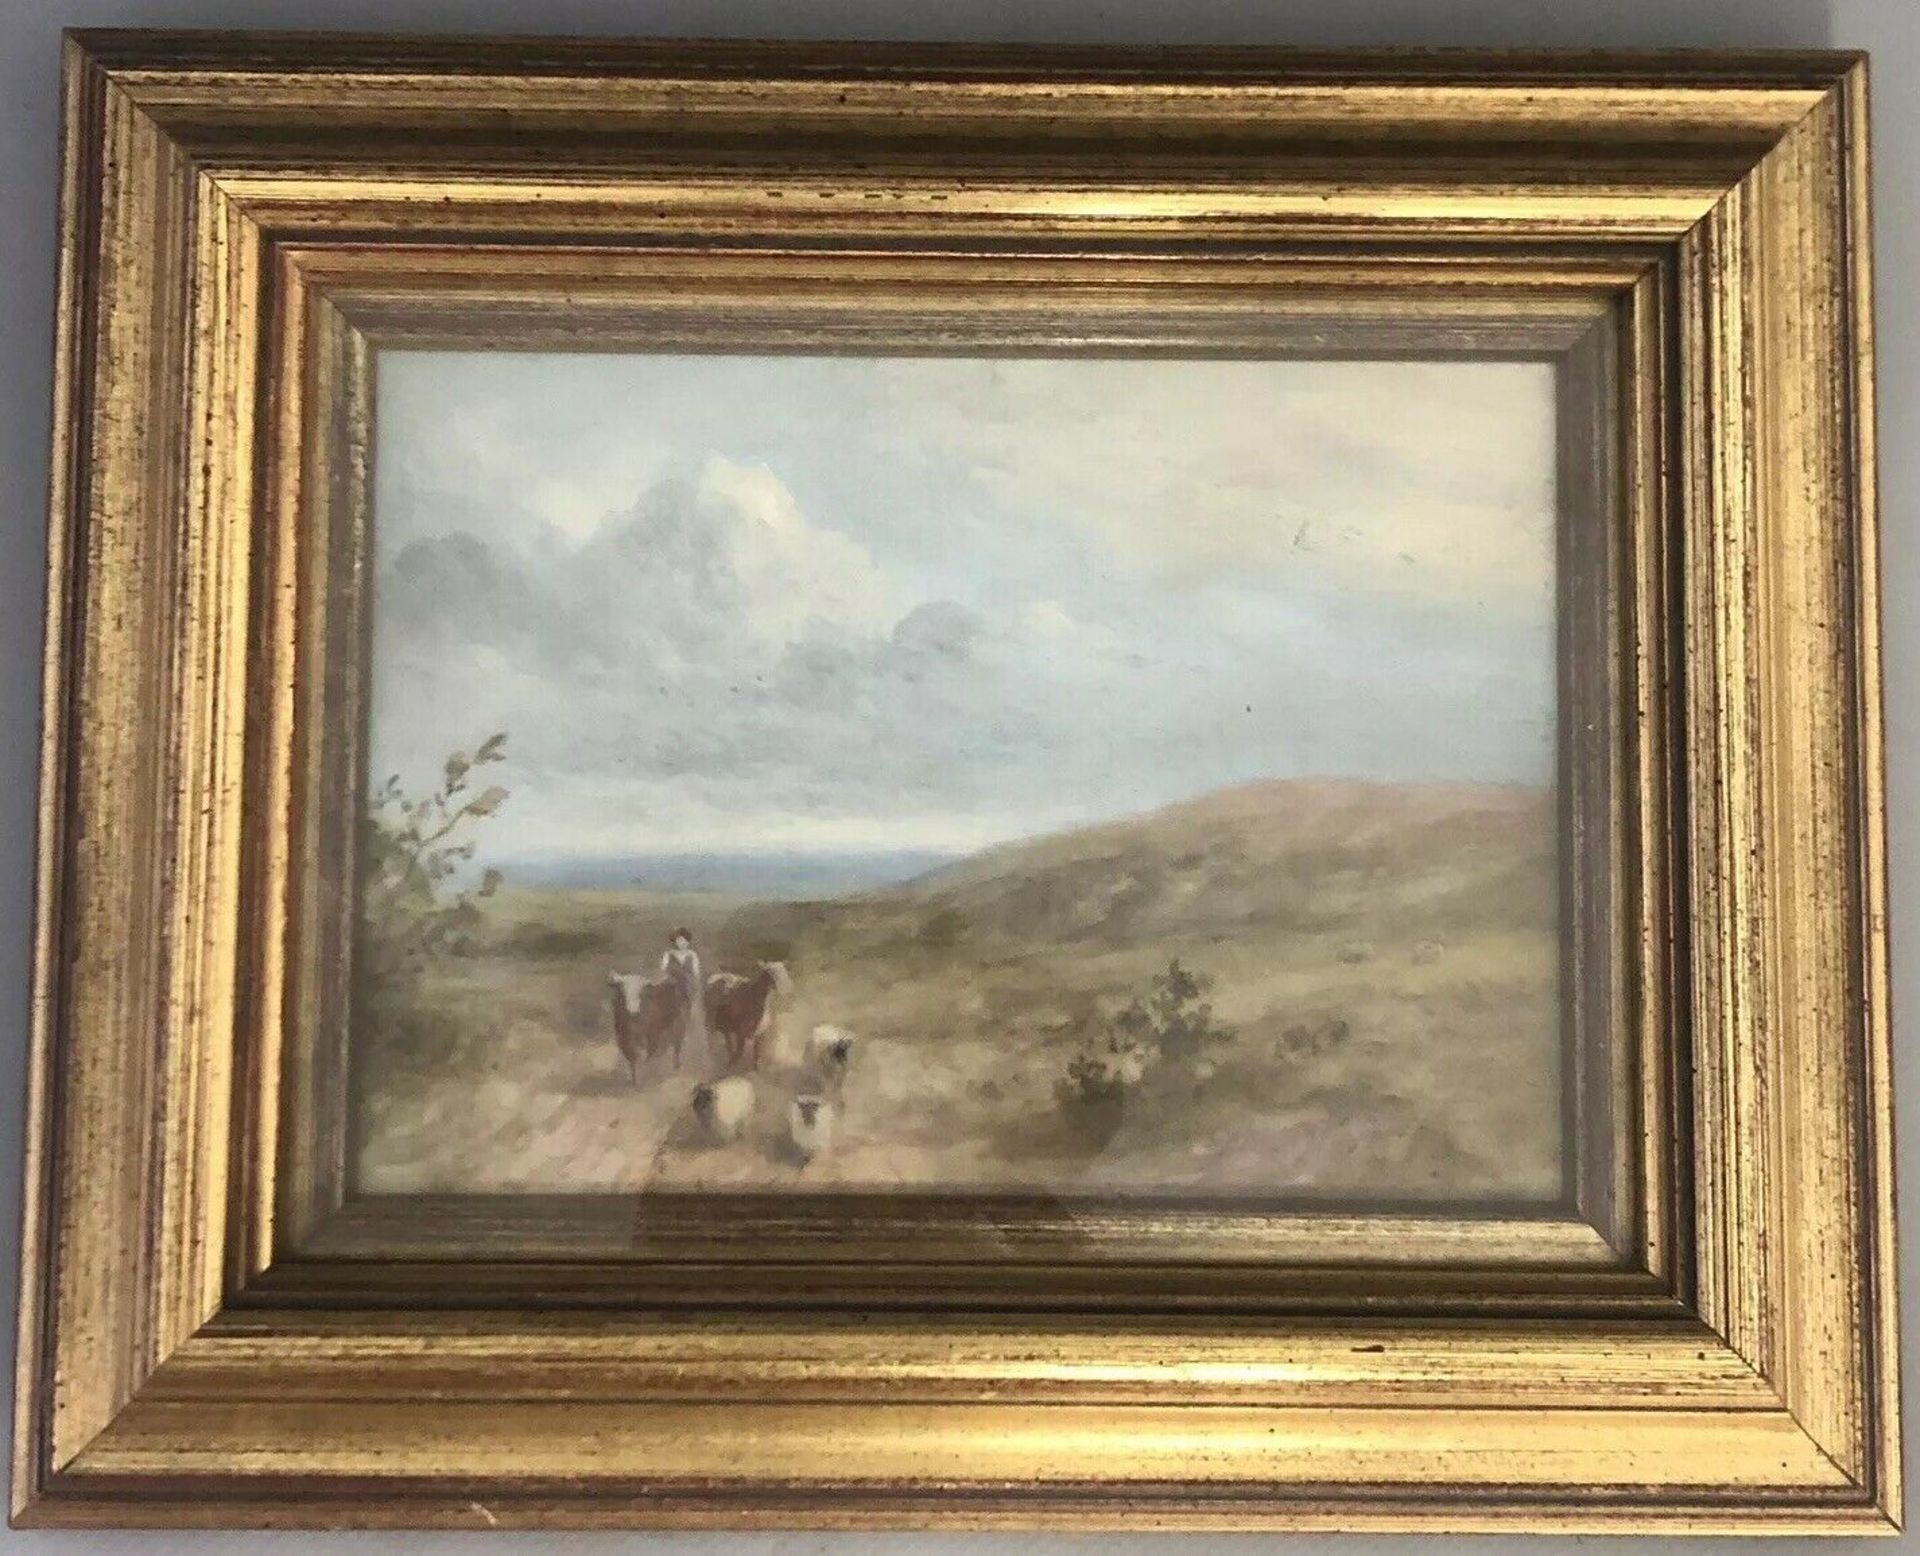 Framed Vintage Small Oil Painting - Farmer Cows Sheep - Unsigned - Gilt Frame